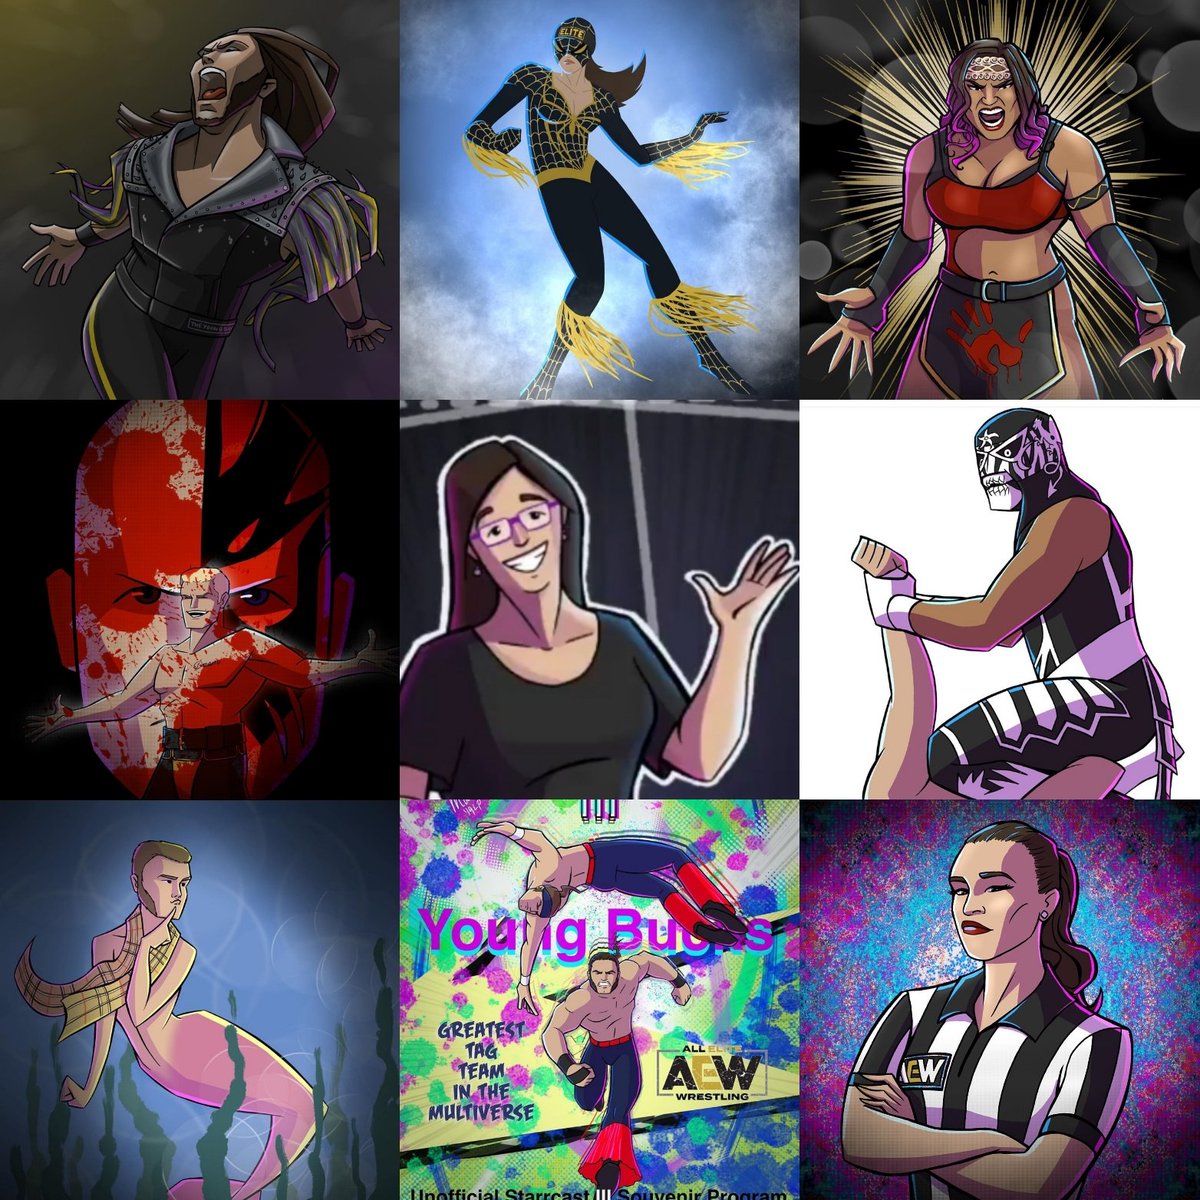 #artvsartist2019 I did one back in February but wrestling is so inspiring I had enough to make another one now. #youngbucks #thenativebeast #TheBrotherHood #luchabrothers #mjf #refaubrey #spiderSona